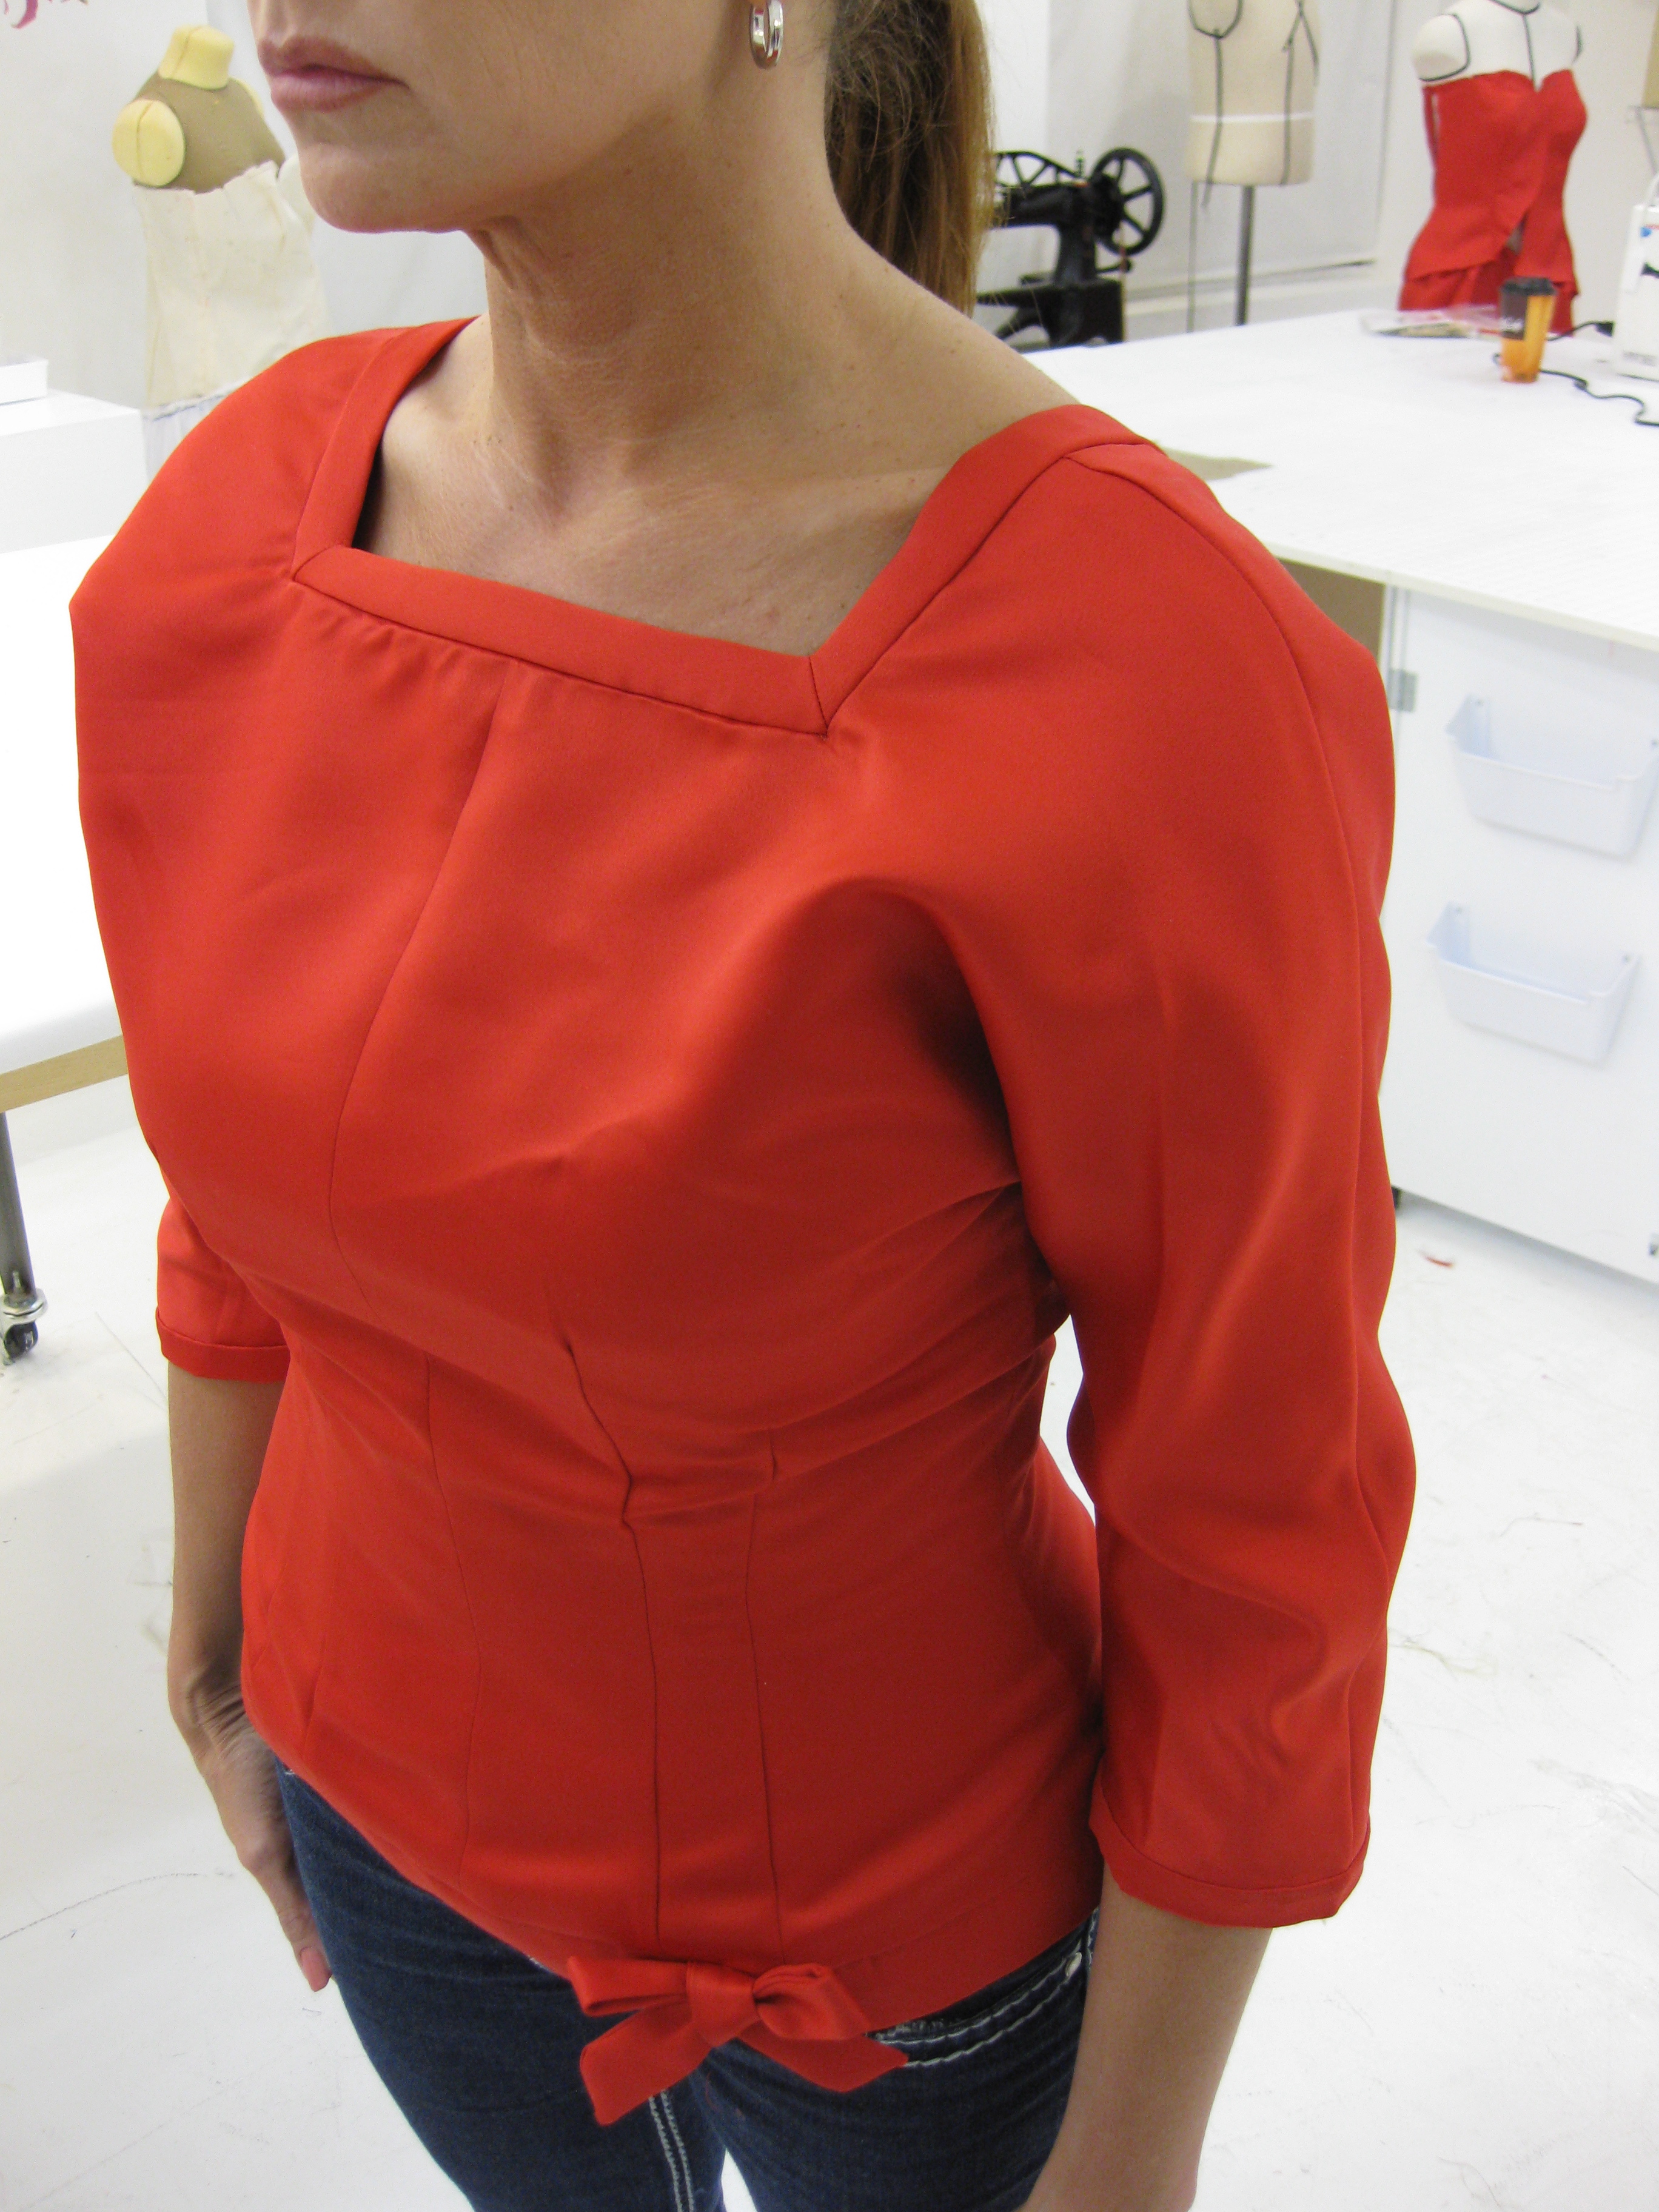 Sewing classes in chicago: tchad: workroom: studio: Debbie permoda: butterick 5557: front #2